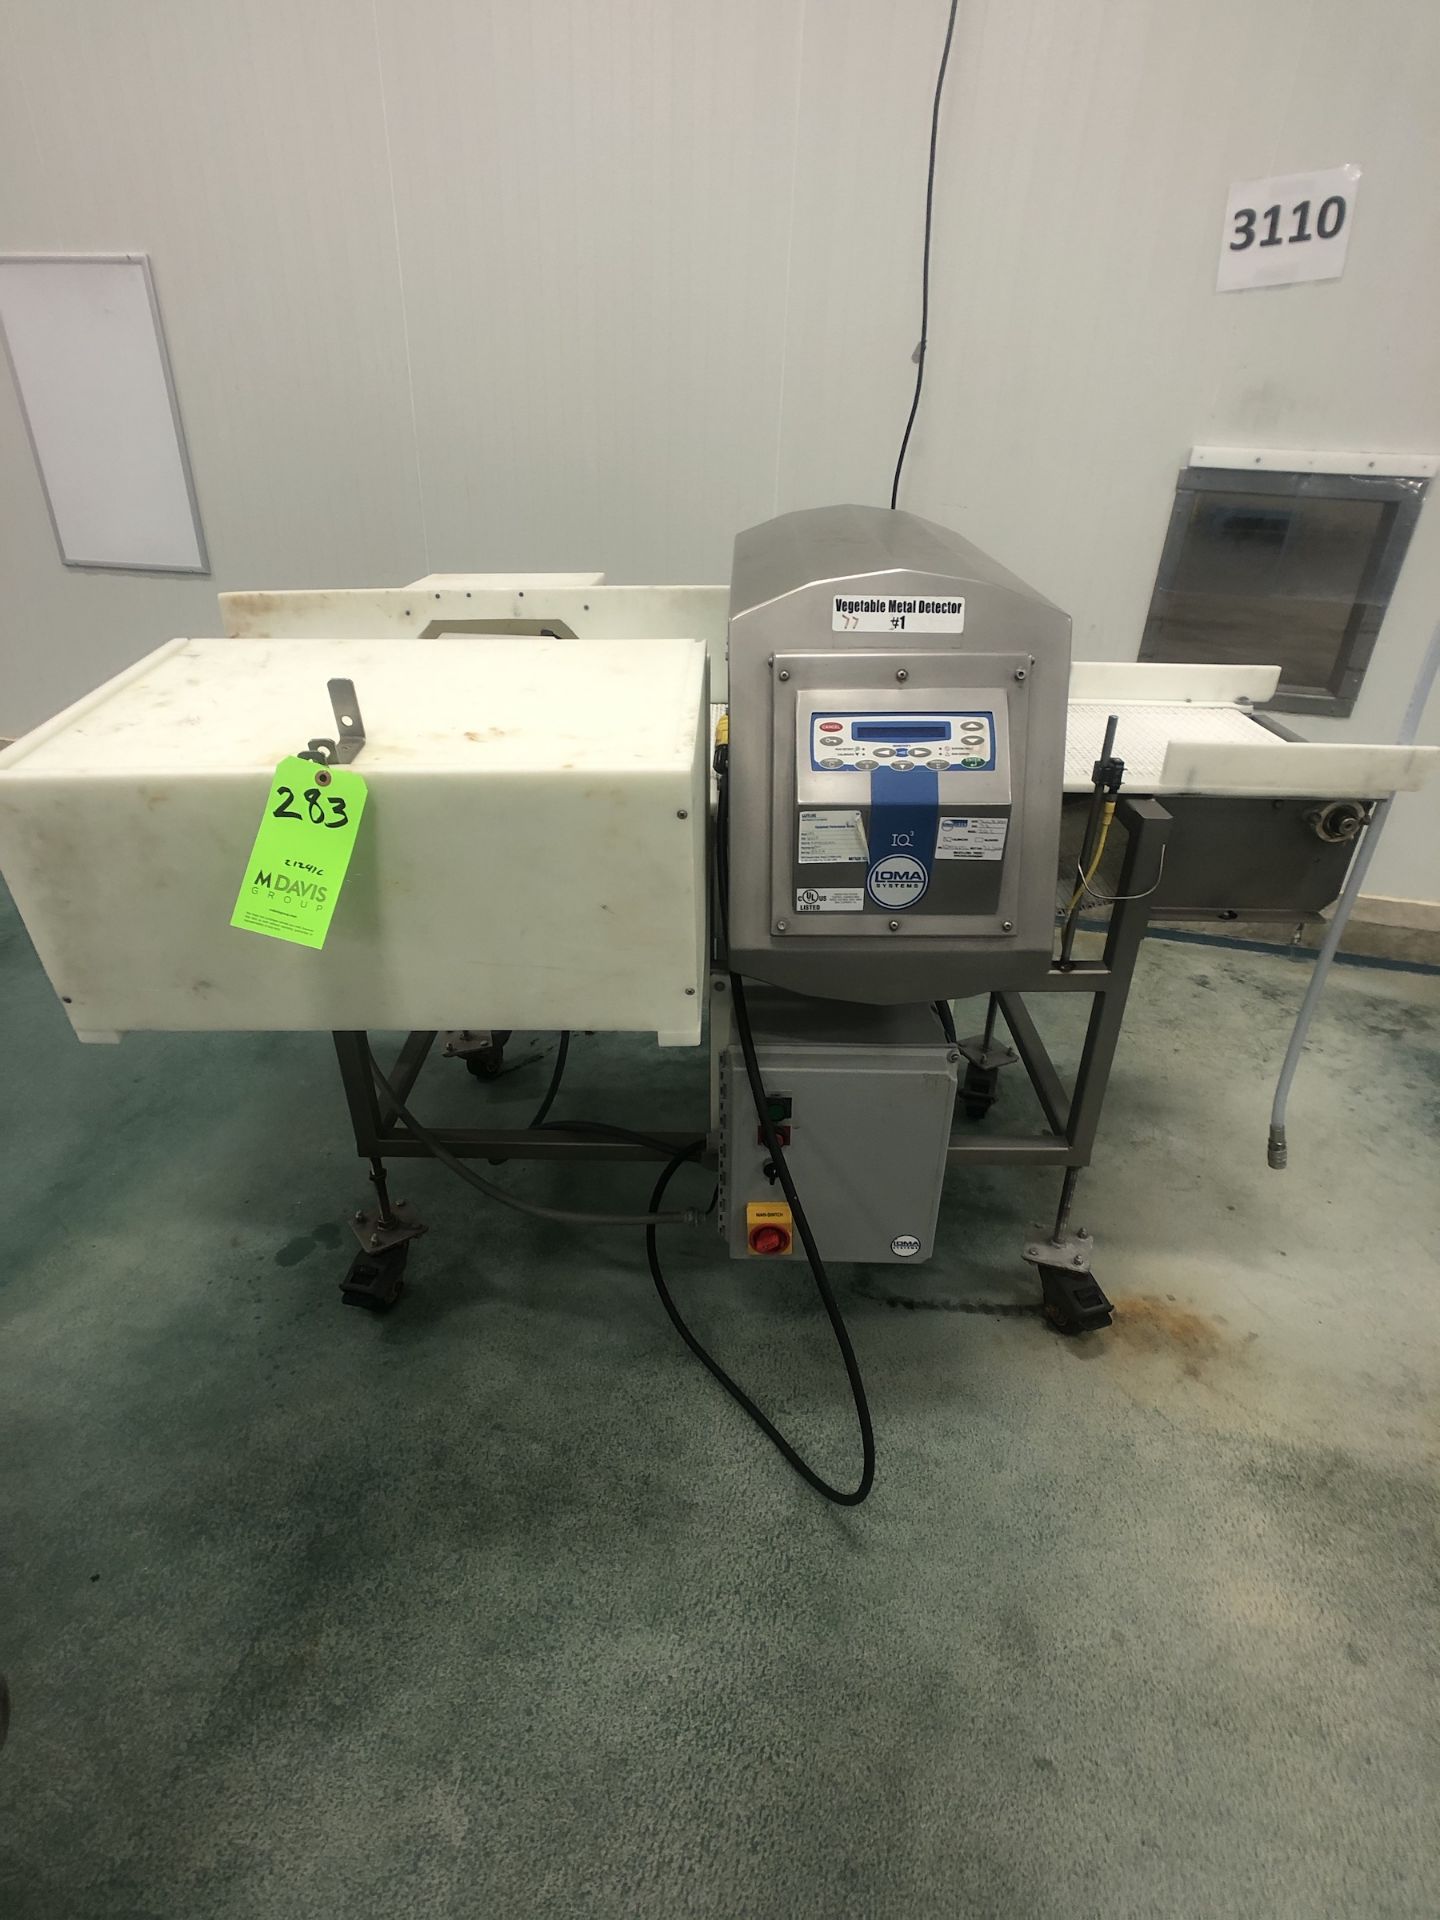 LOMA IQ3 CONVEYORIZED METAL DETECTOR WITH PRODUCT REJECT STATION, S/N KIMD21241L, APPROX. 18" W X 7"